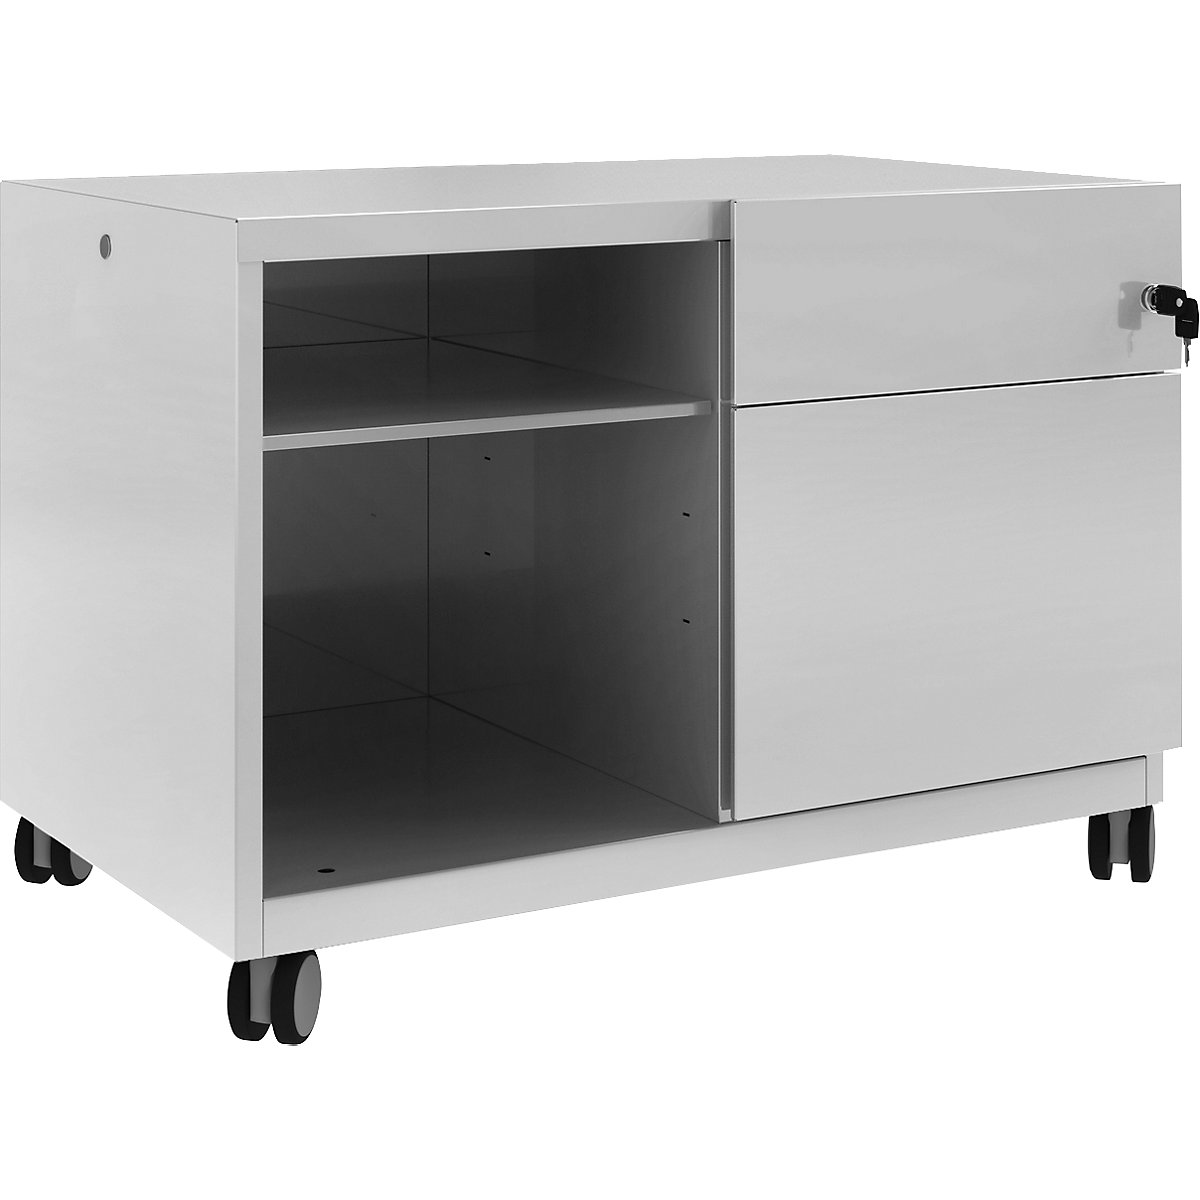 Note™ CADDY, HxBxT 563 x 800 x 490 mm – BISLEY, 1 universal drawer and suspension file drawer on the right, goose grey-7